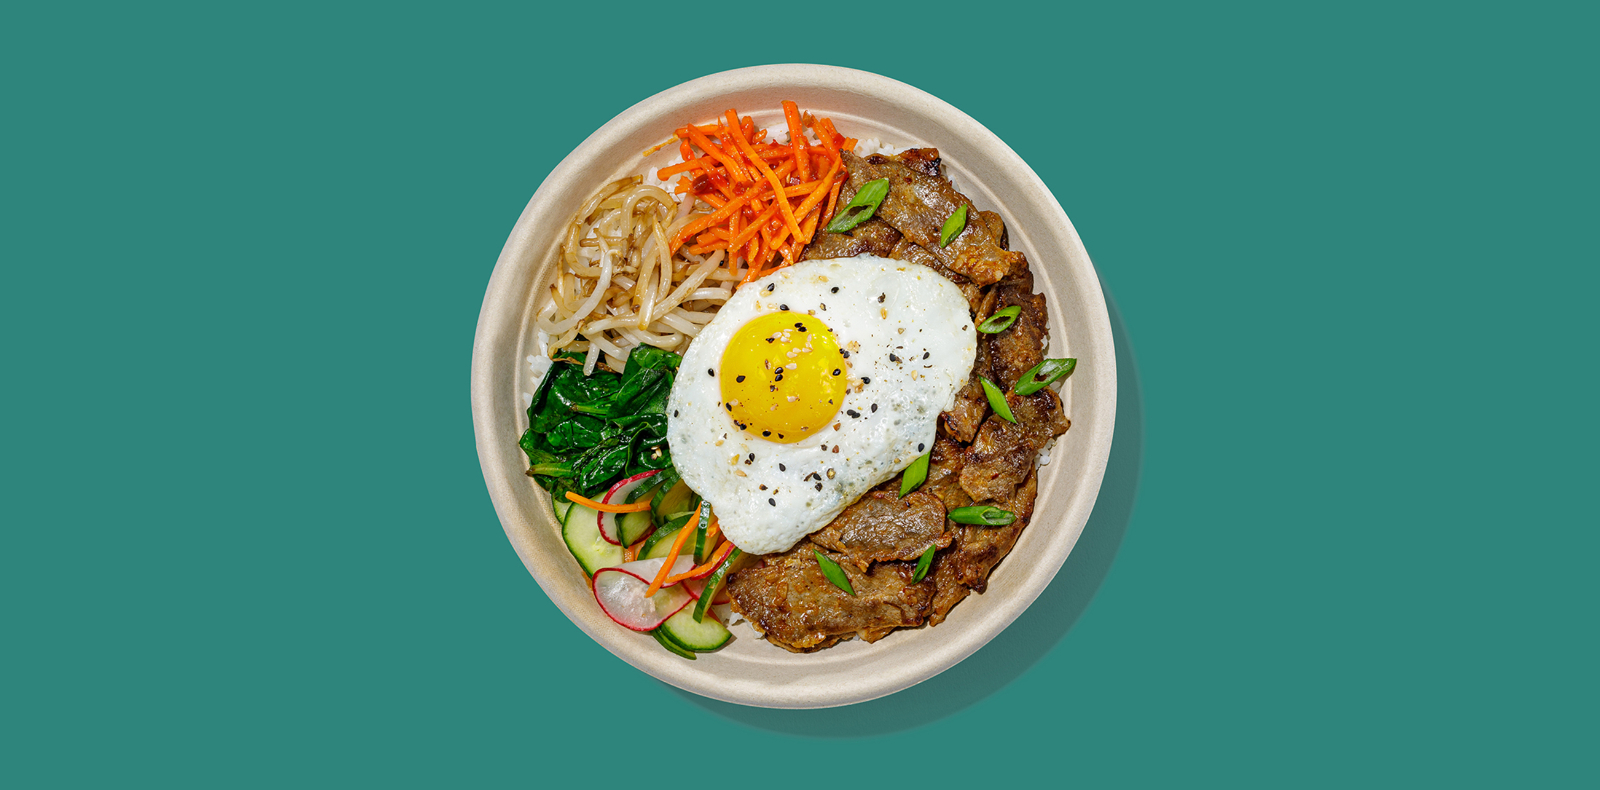 New Roadtrip Bowl called Korean Ribeye Bibimbap with Gochujang-marinated shaved ribeye, steamed rice, spicy carrots, pickled cucumbers, bean sprouts, spinach, sesame seeds, green onions, sunny-side up egg alt tag 